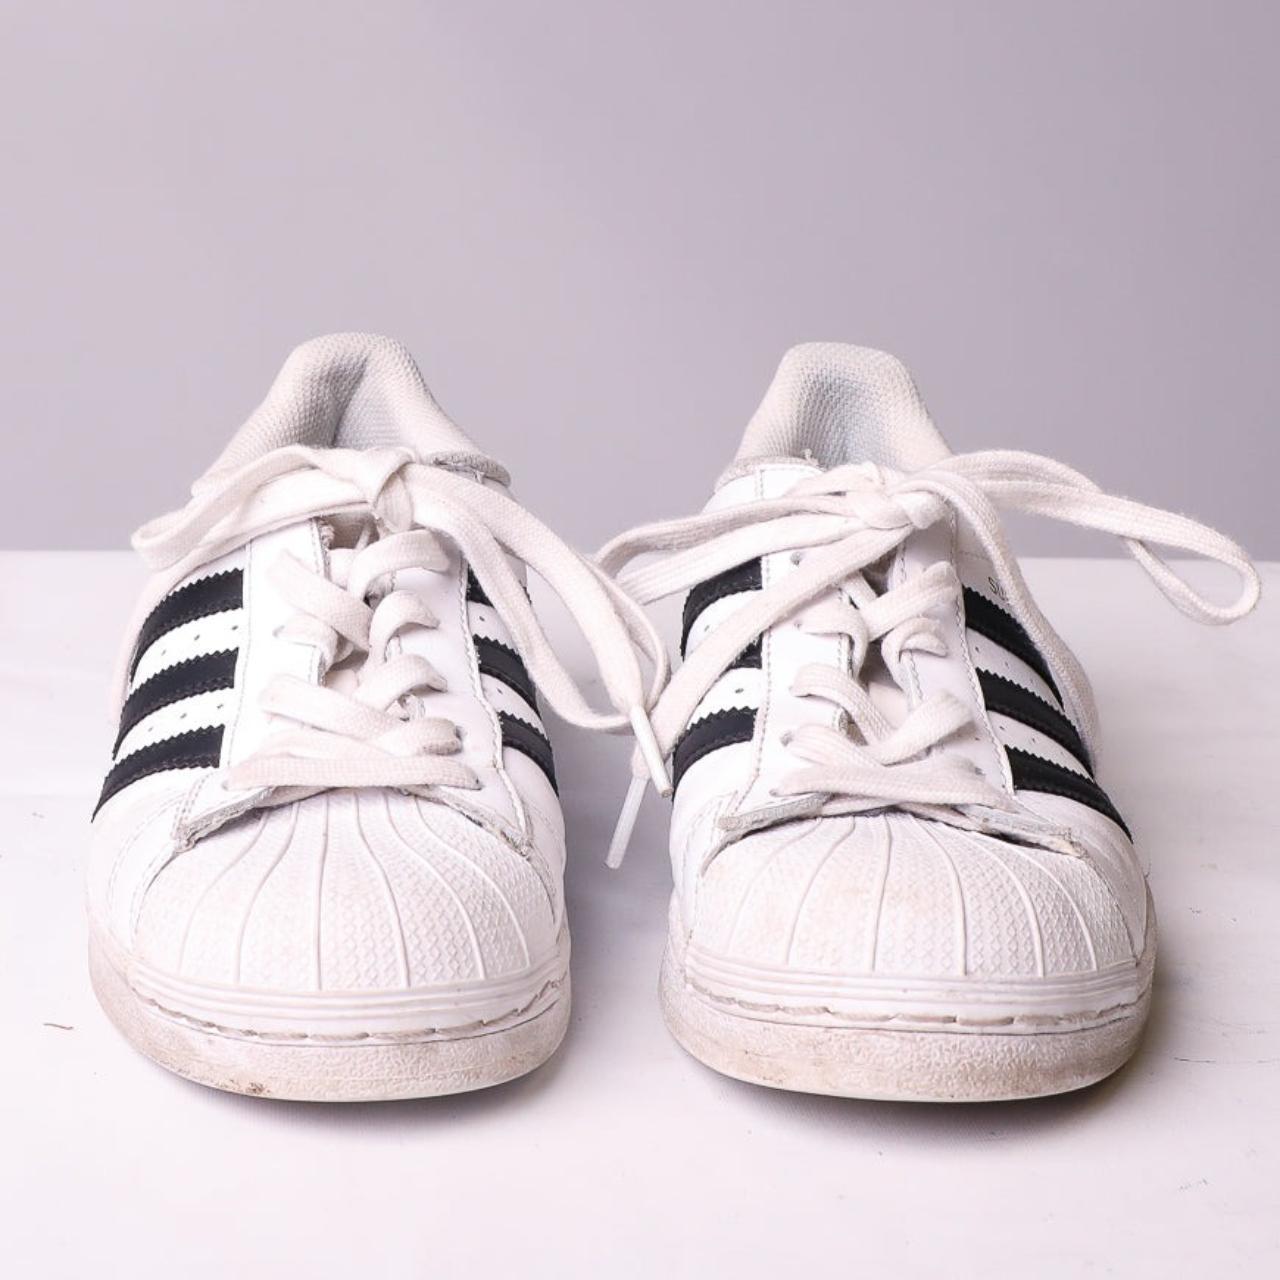 Vintage Adidas Shate Shoes in Black/white• Size on... - Depop